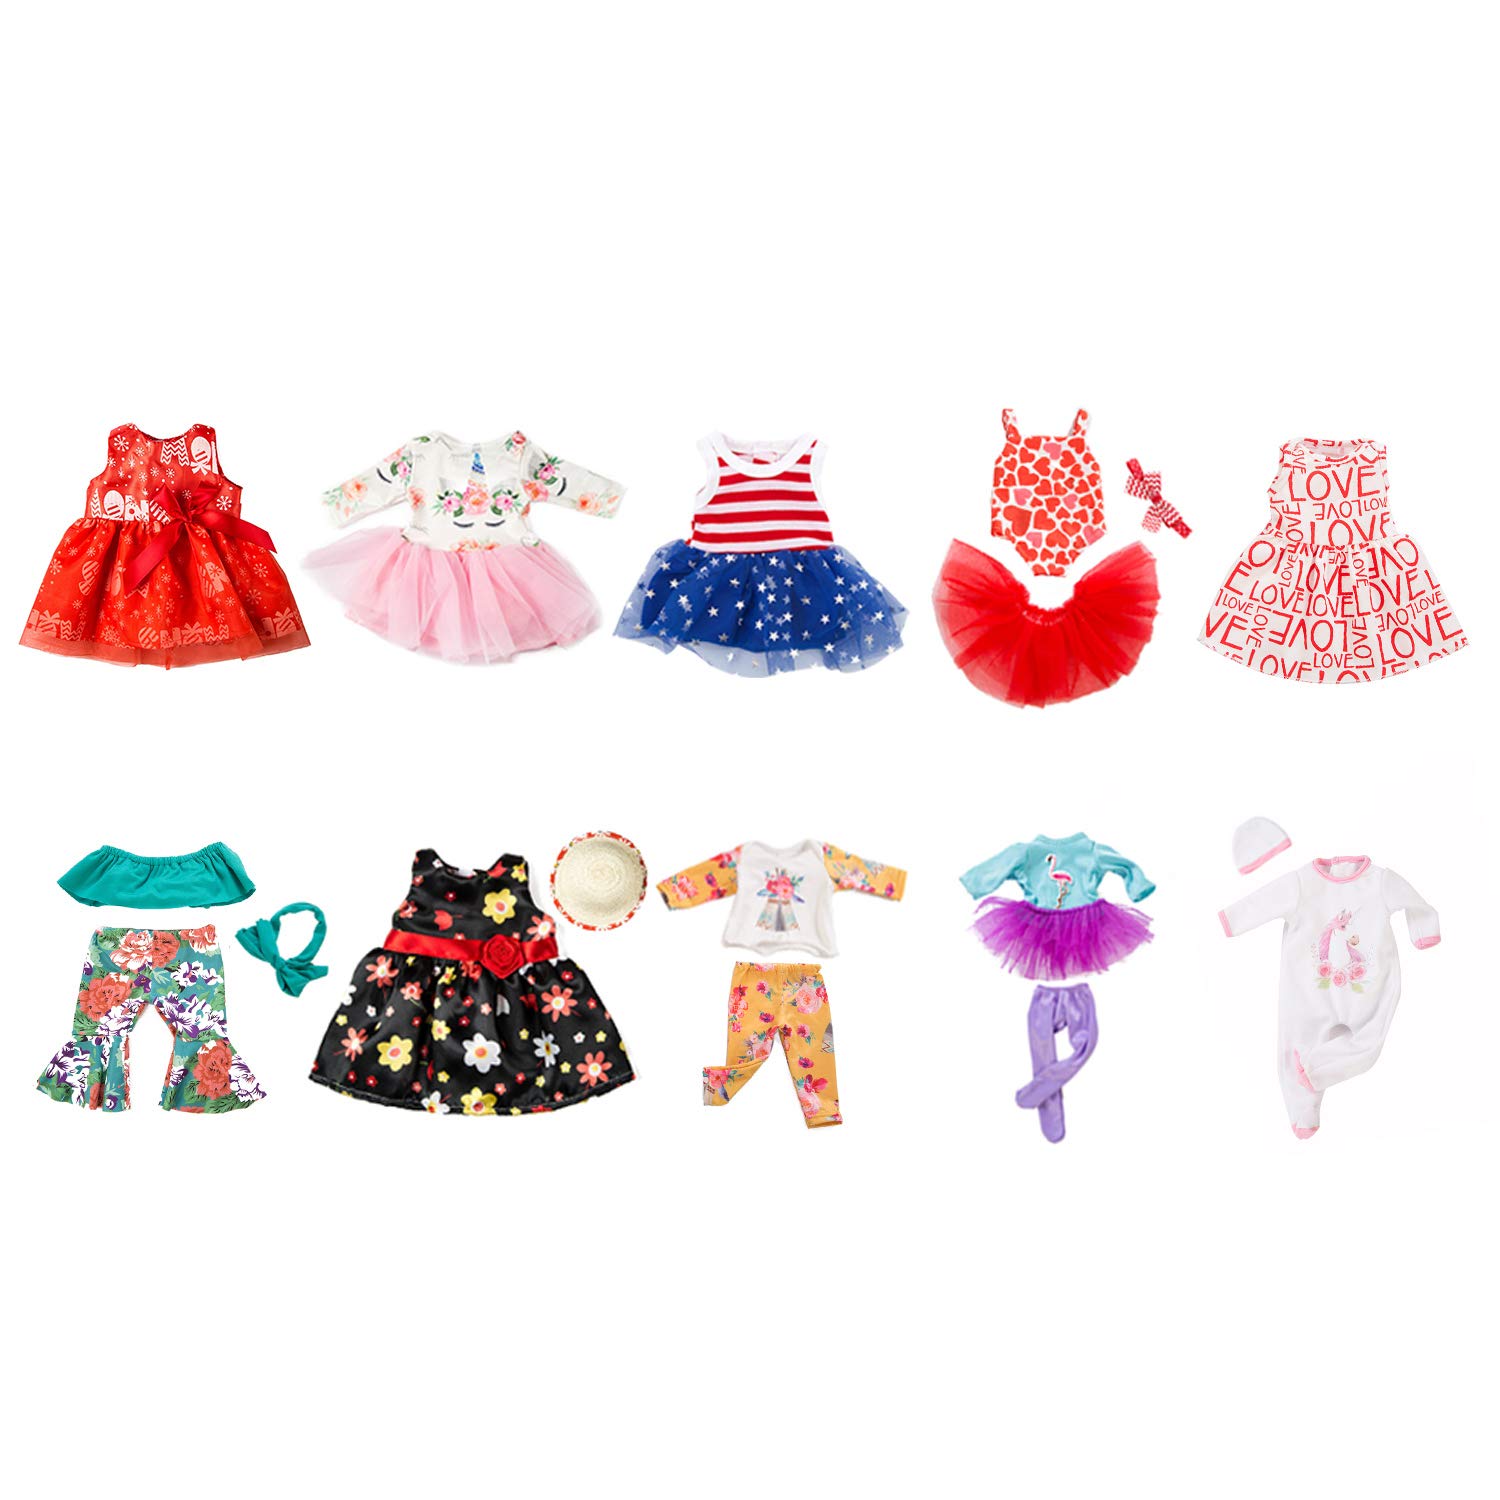 ZQDOLL 19 pcs Girl Doll Clothes Gift for 18 inch Doll Clothes and Accessories, Including 10 Complete Sets of Clothing (AZW25)